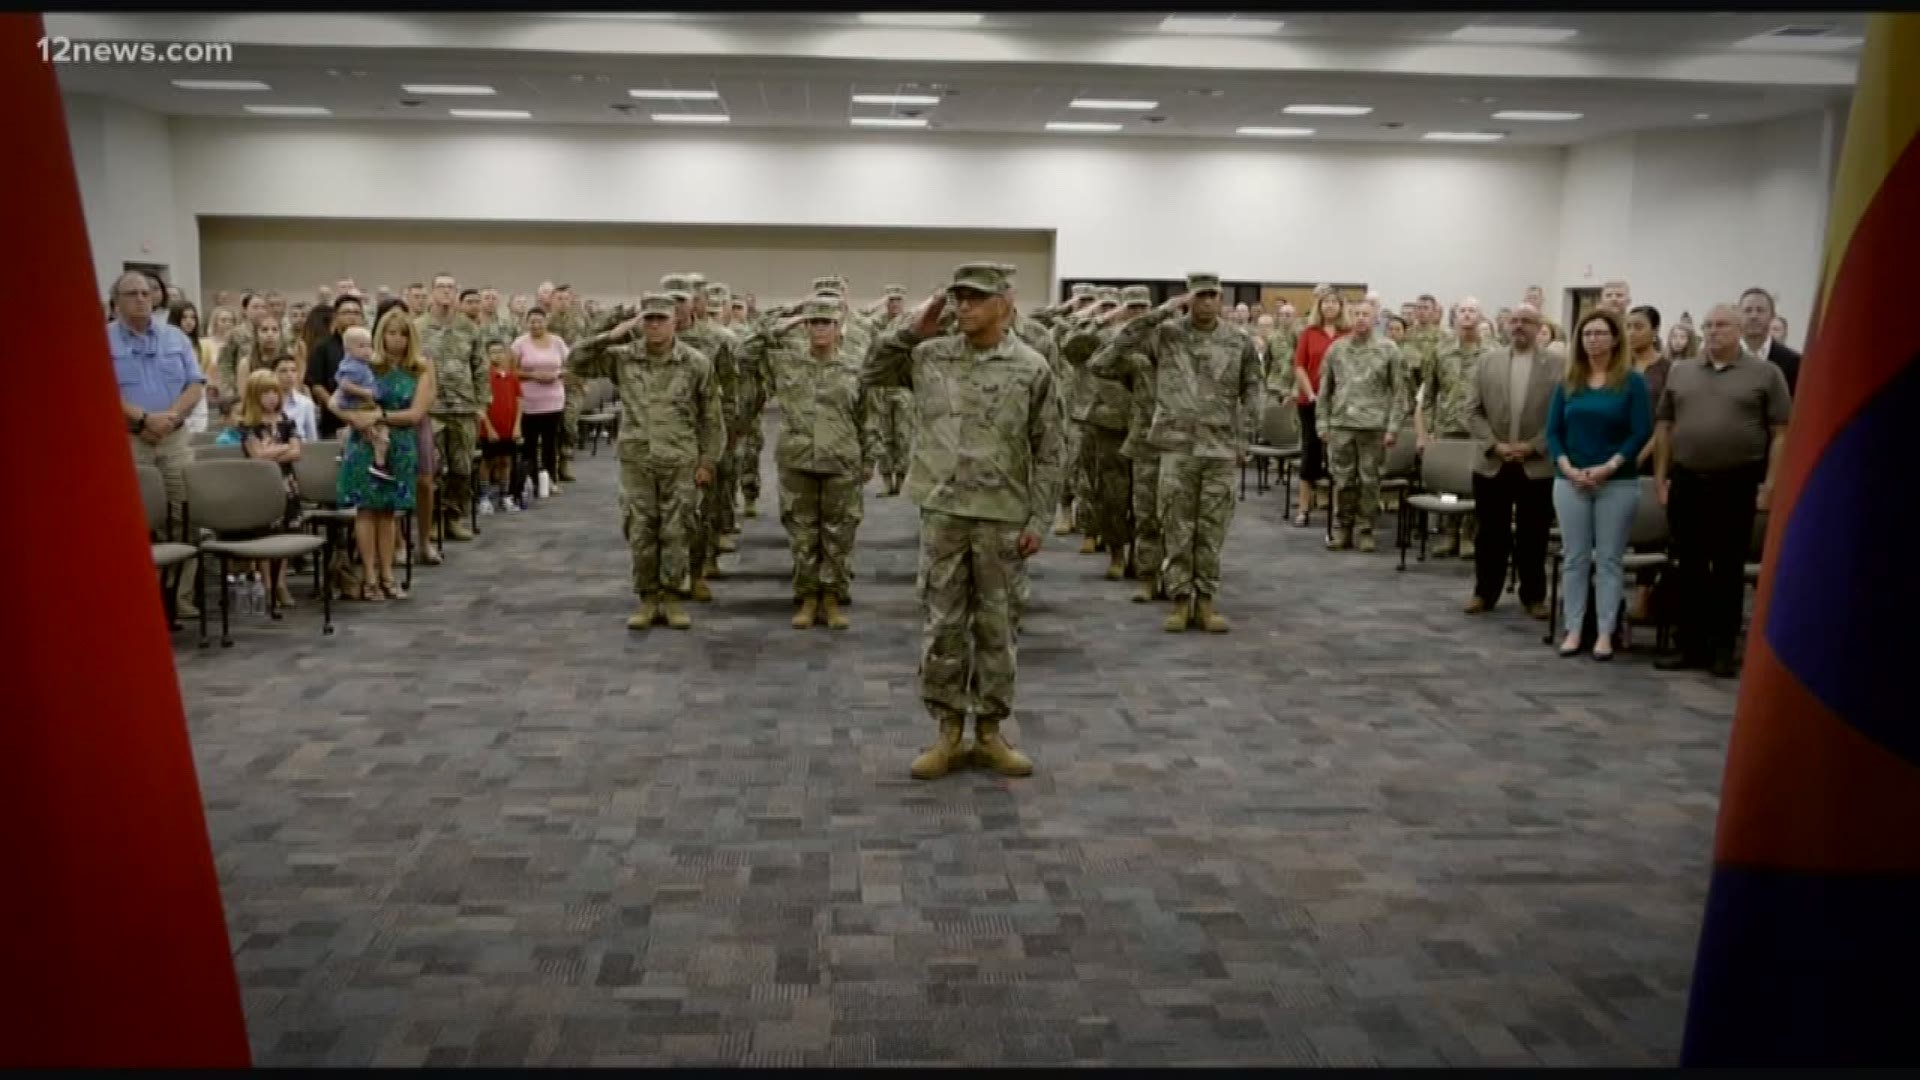 The Arizona National Guard is sending about 25 soldiers from The 158th Maneuver Enhancement Brigade to the Middle East. While leaving their families is tough, they're dedicated to serving our country.